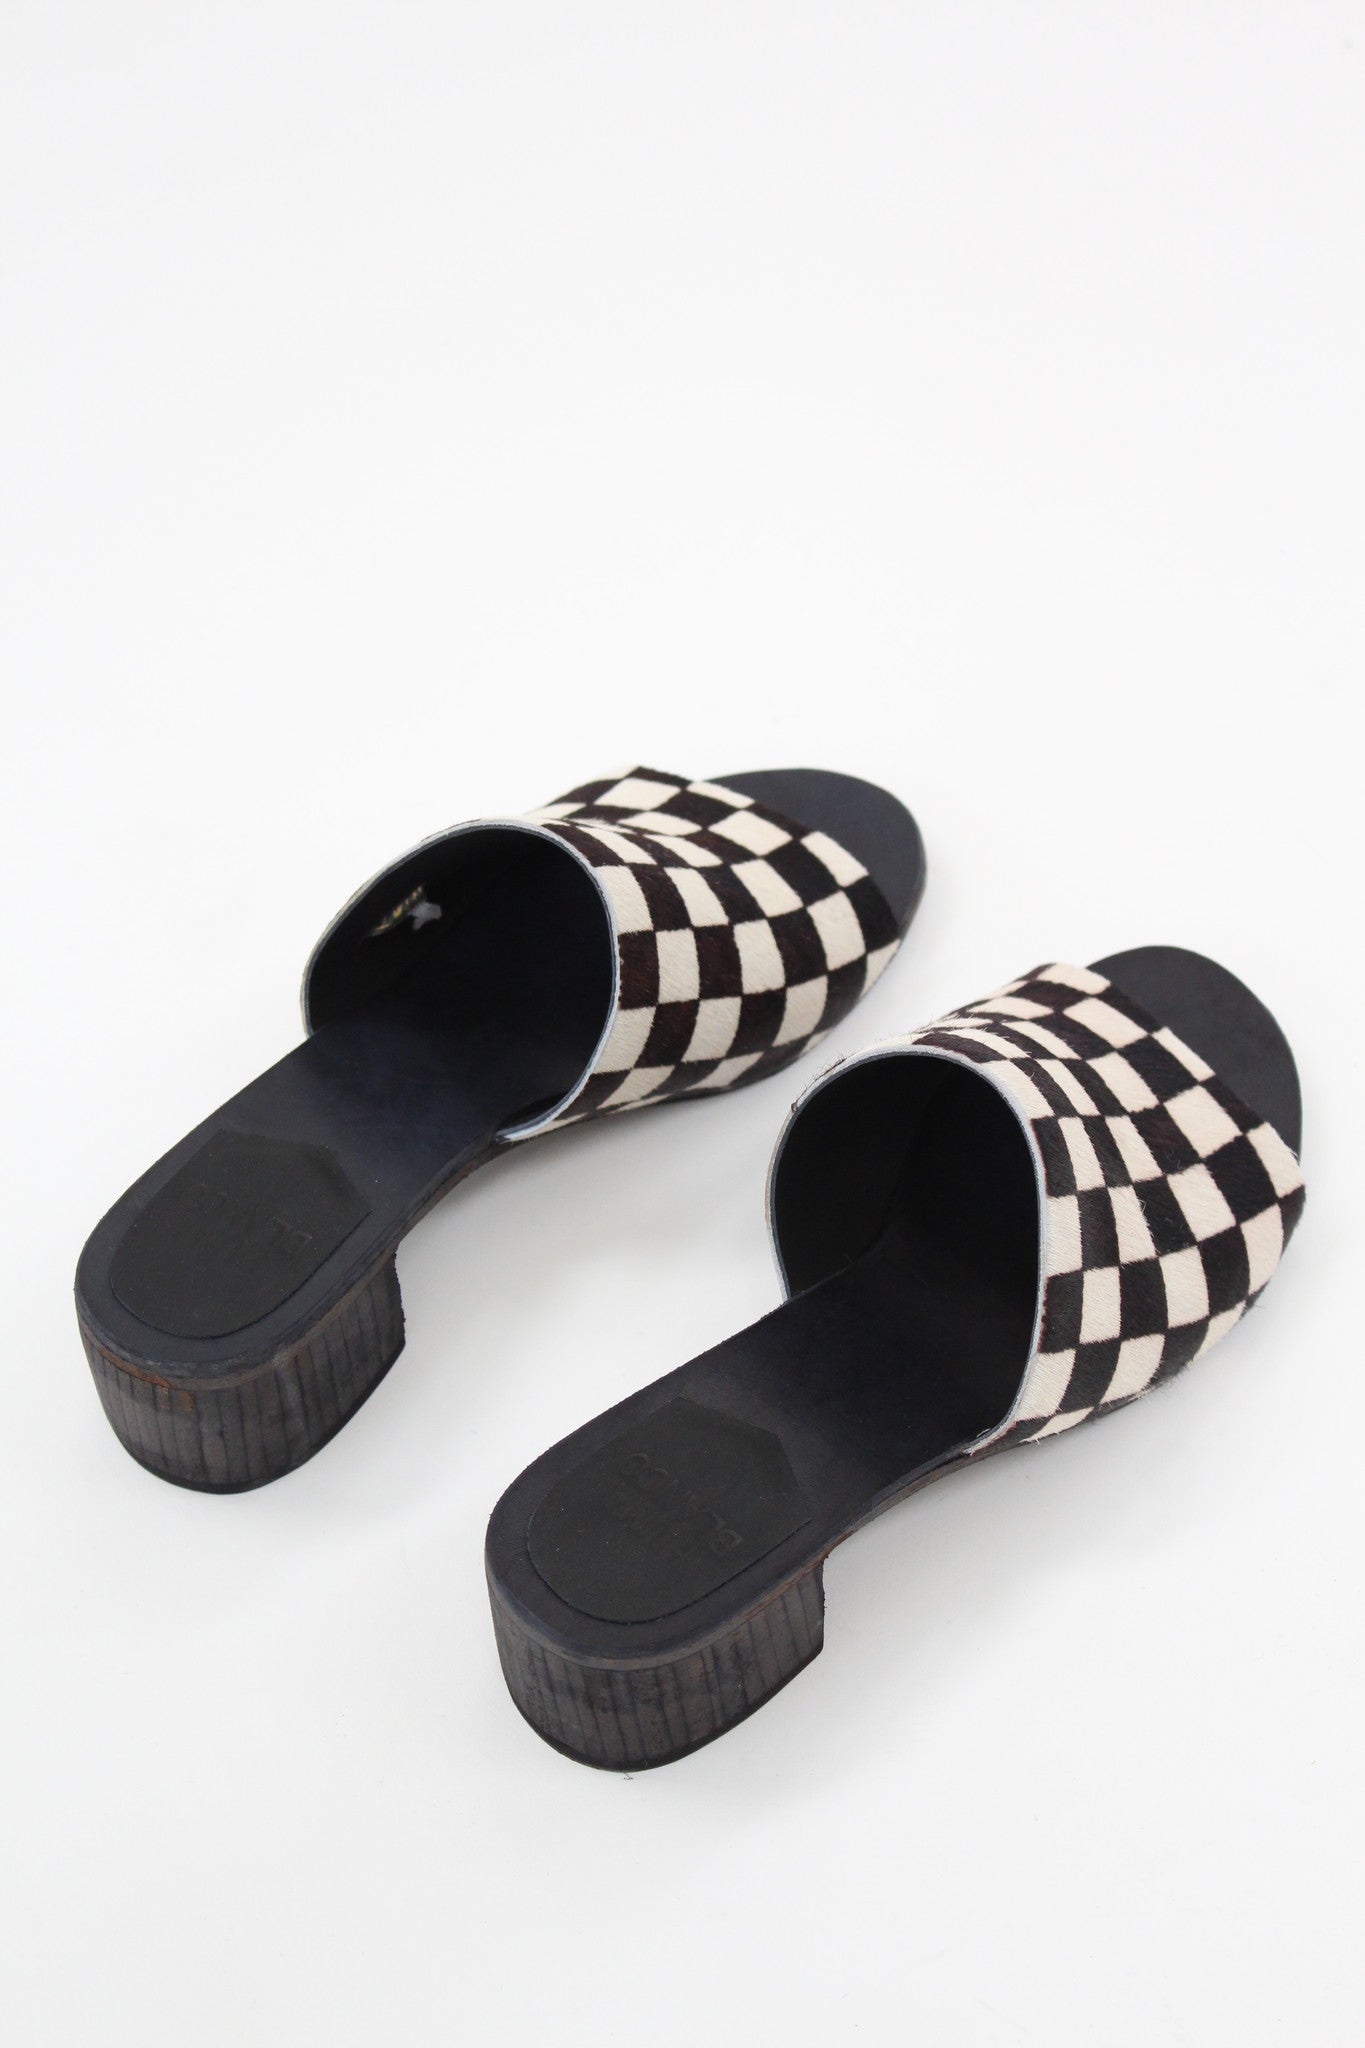 Carly Checkered Slides